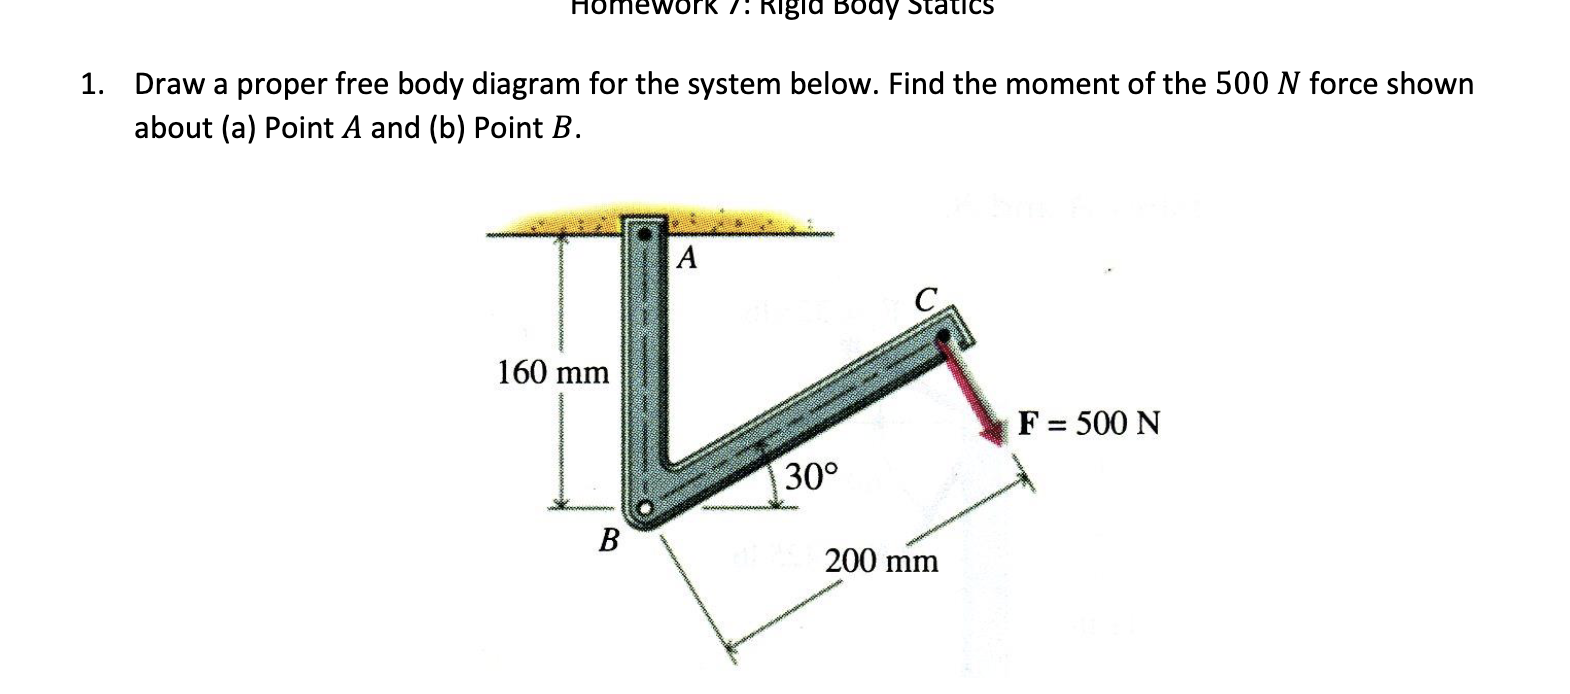 1. Draw a proper free body diagram for the system below. Find the moment of the \( 500 \mathrm{~N} \) force shown about (a) P